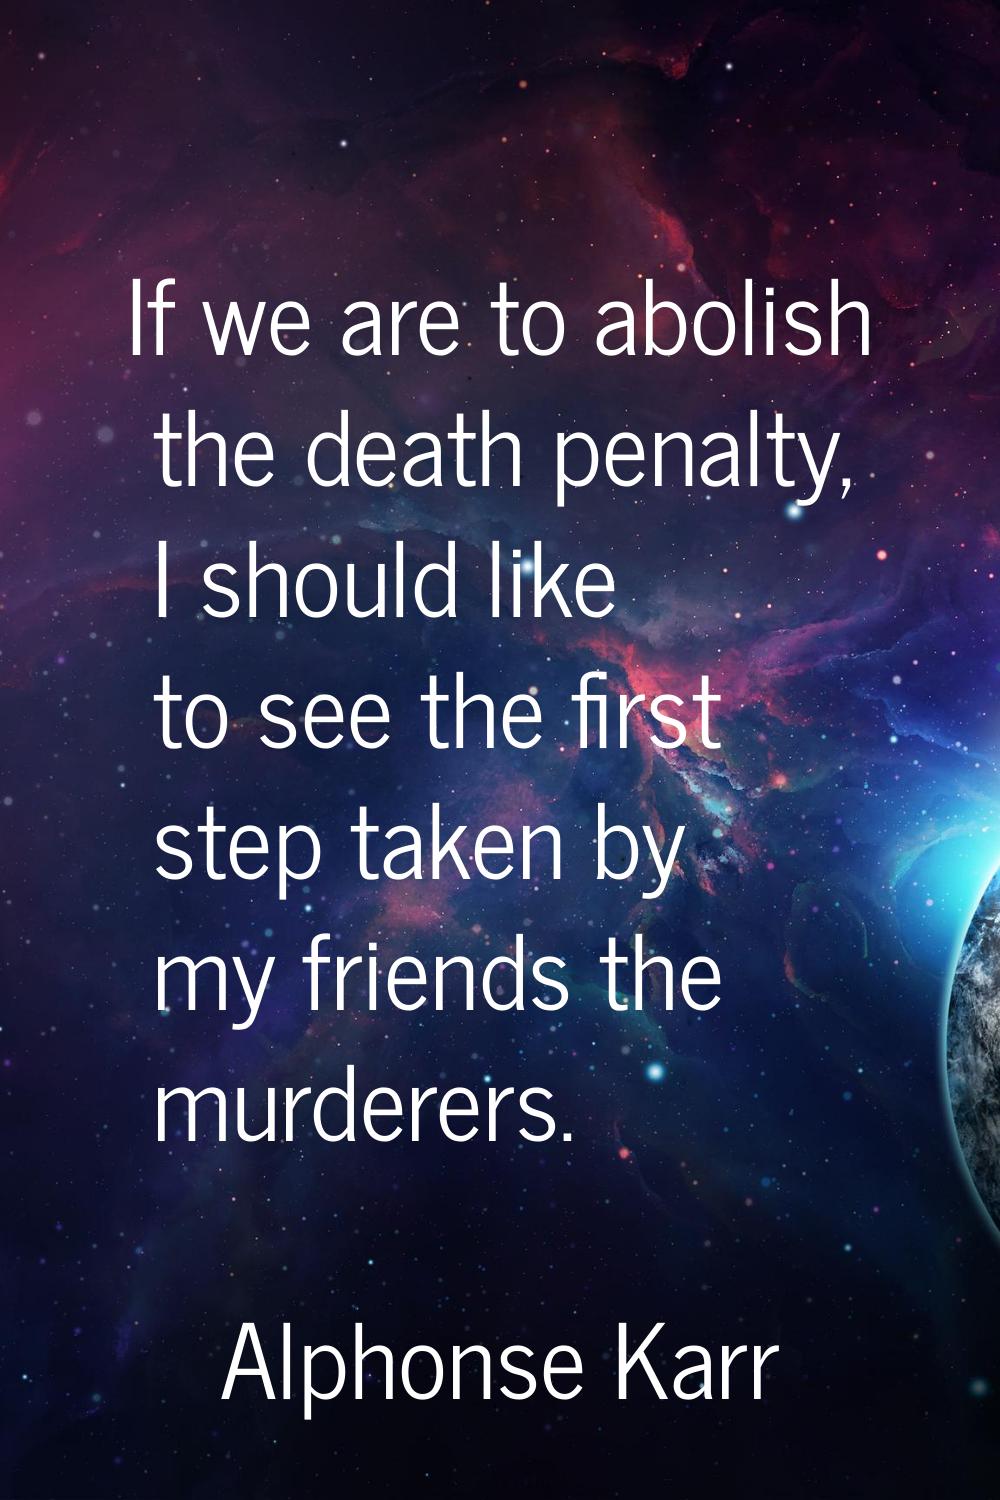 If we are to abolish the death penalty, I should like to see the first step taken by my friends the